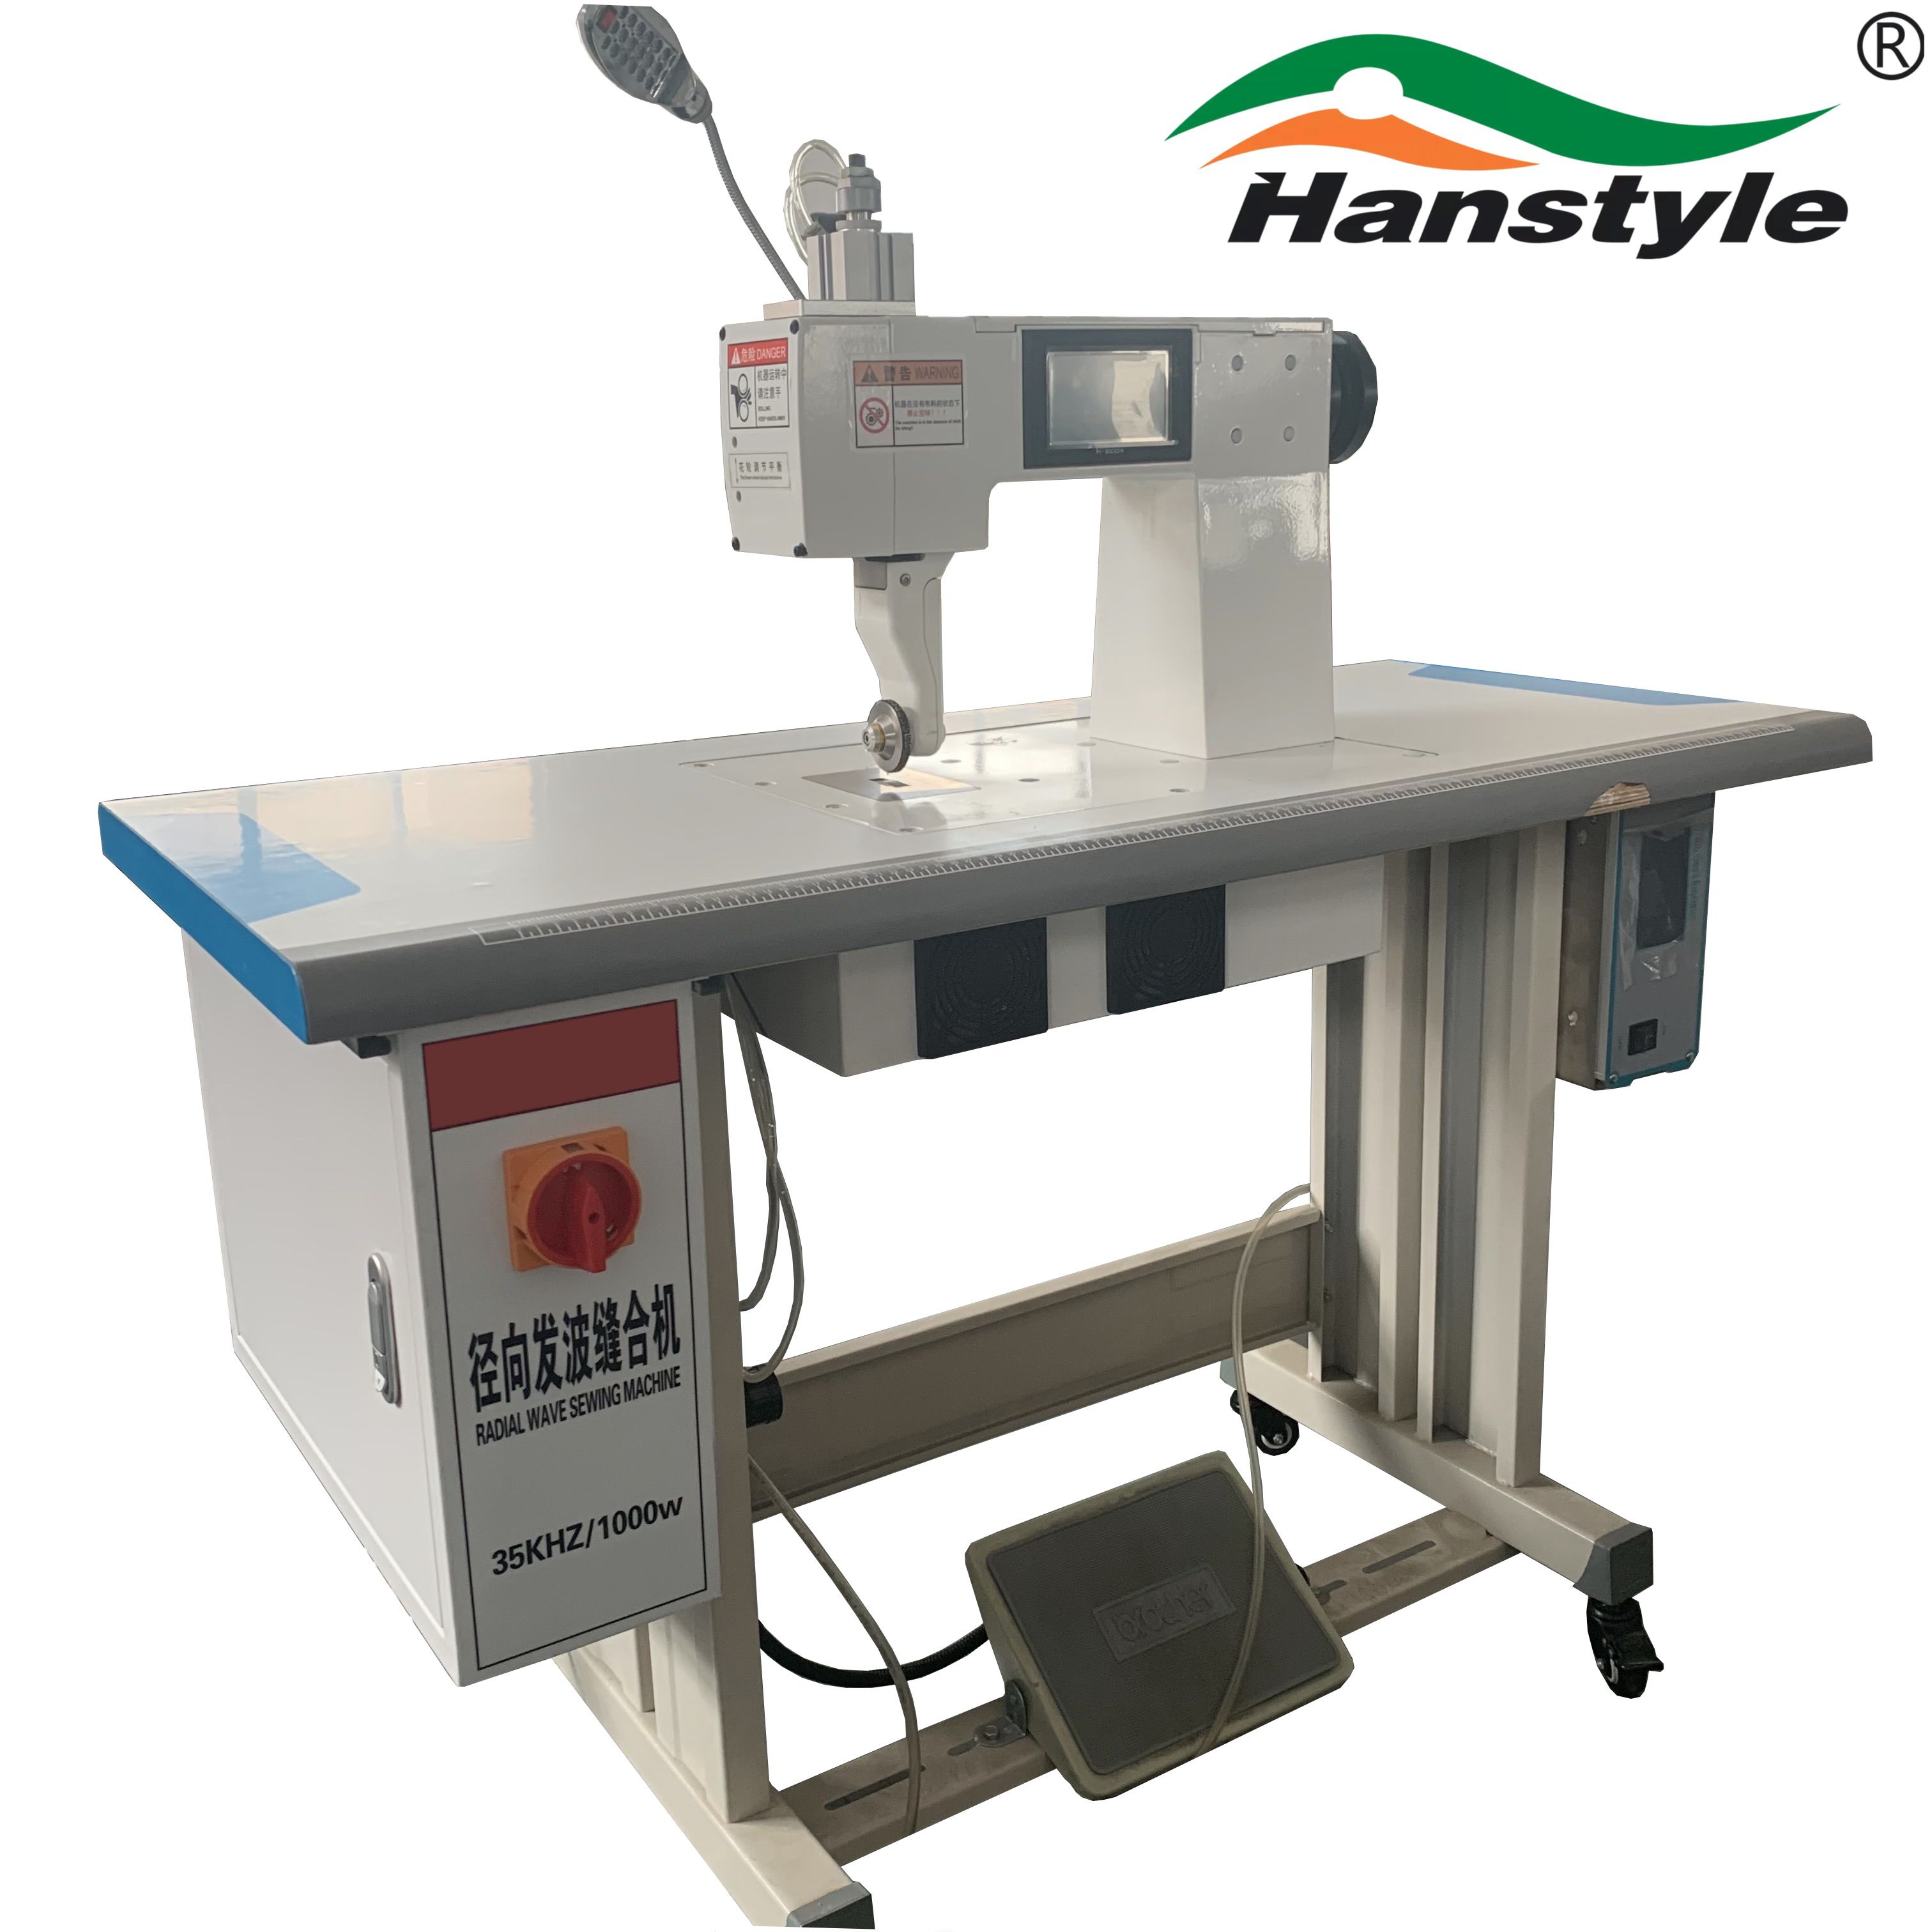 Hanspire Ultrasonic Sewing Machine: Function and Application